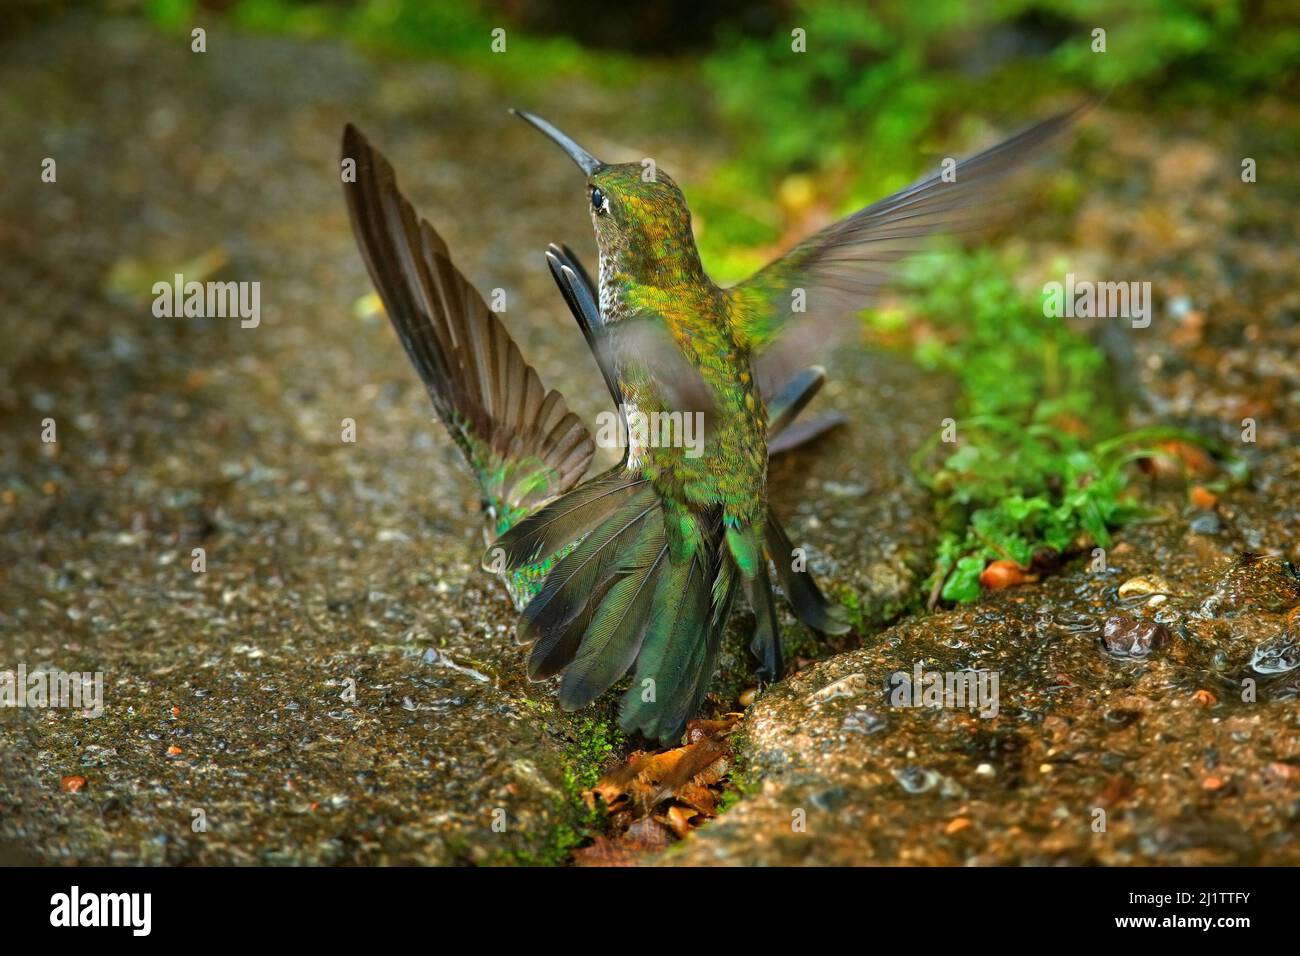 Hummingbird fight. Many-spotted hummingbird, Taphrospilus hypostictus, beautiful bird with crest, mating in the green tropic forest, Sumaco, Ecuador. Stock Photo